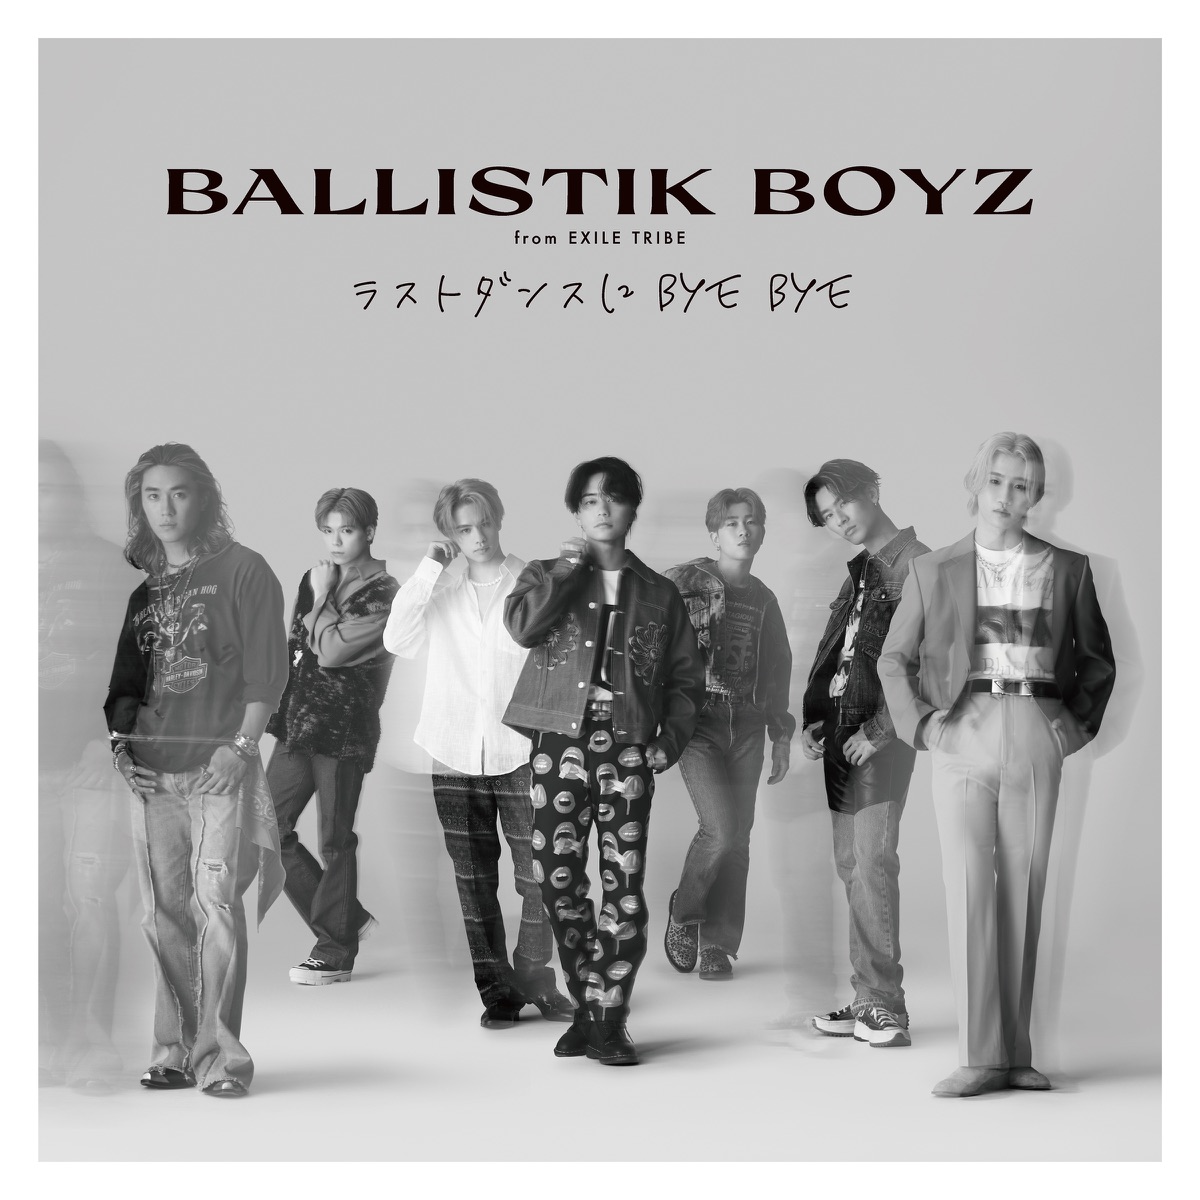 『BALLISTIK BOYZ from EXILE TRIBE - Heads or Tails』収録の『BALLISTIK BOYZ FROM EXILE』ジャケット